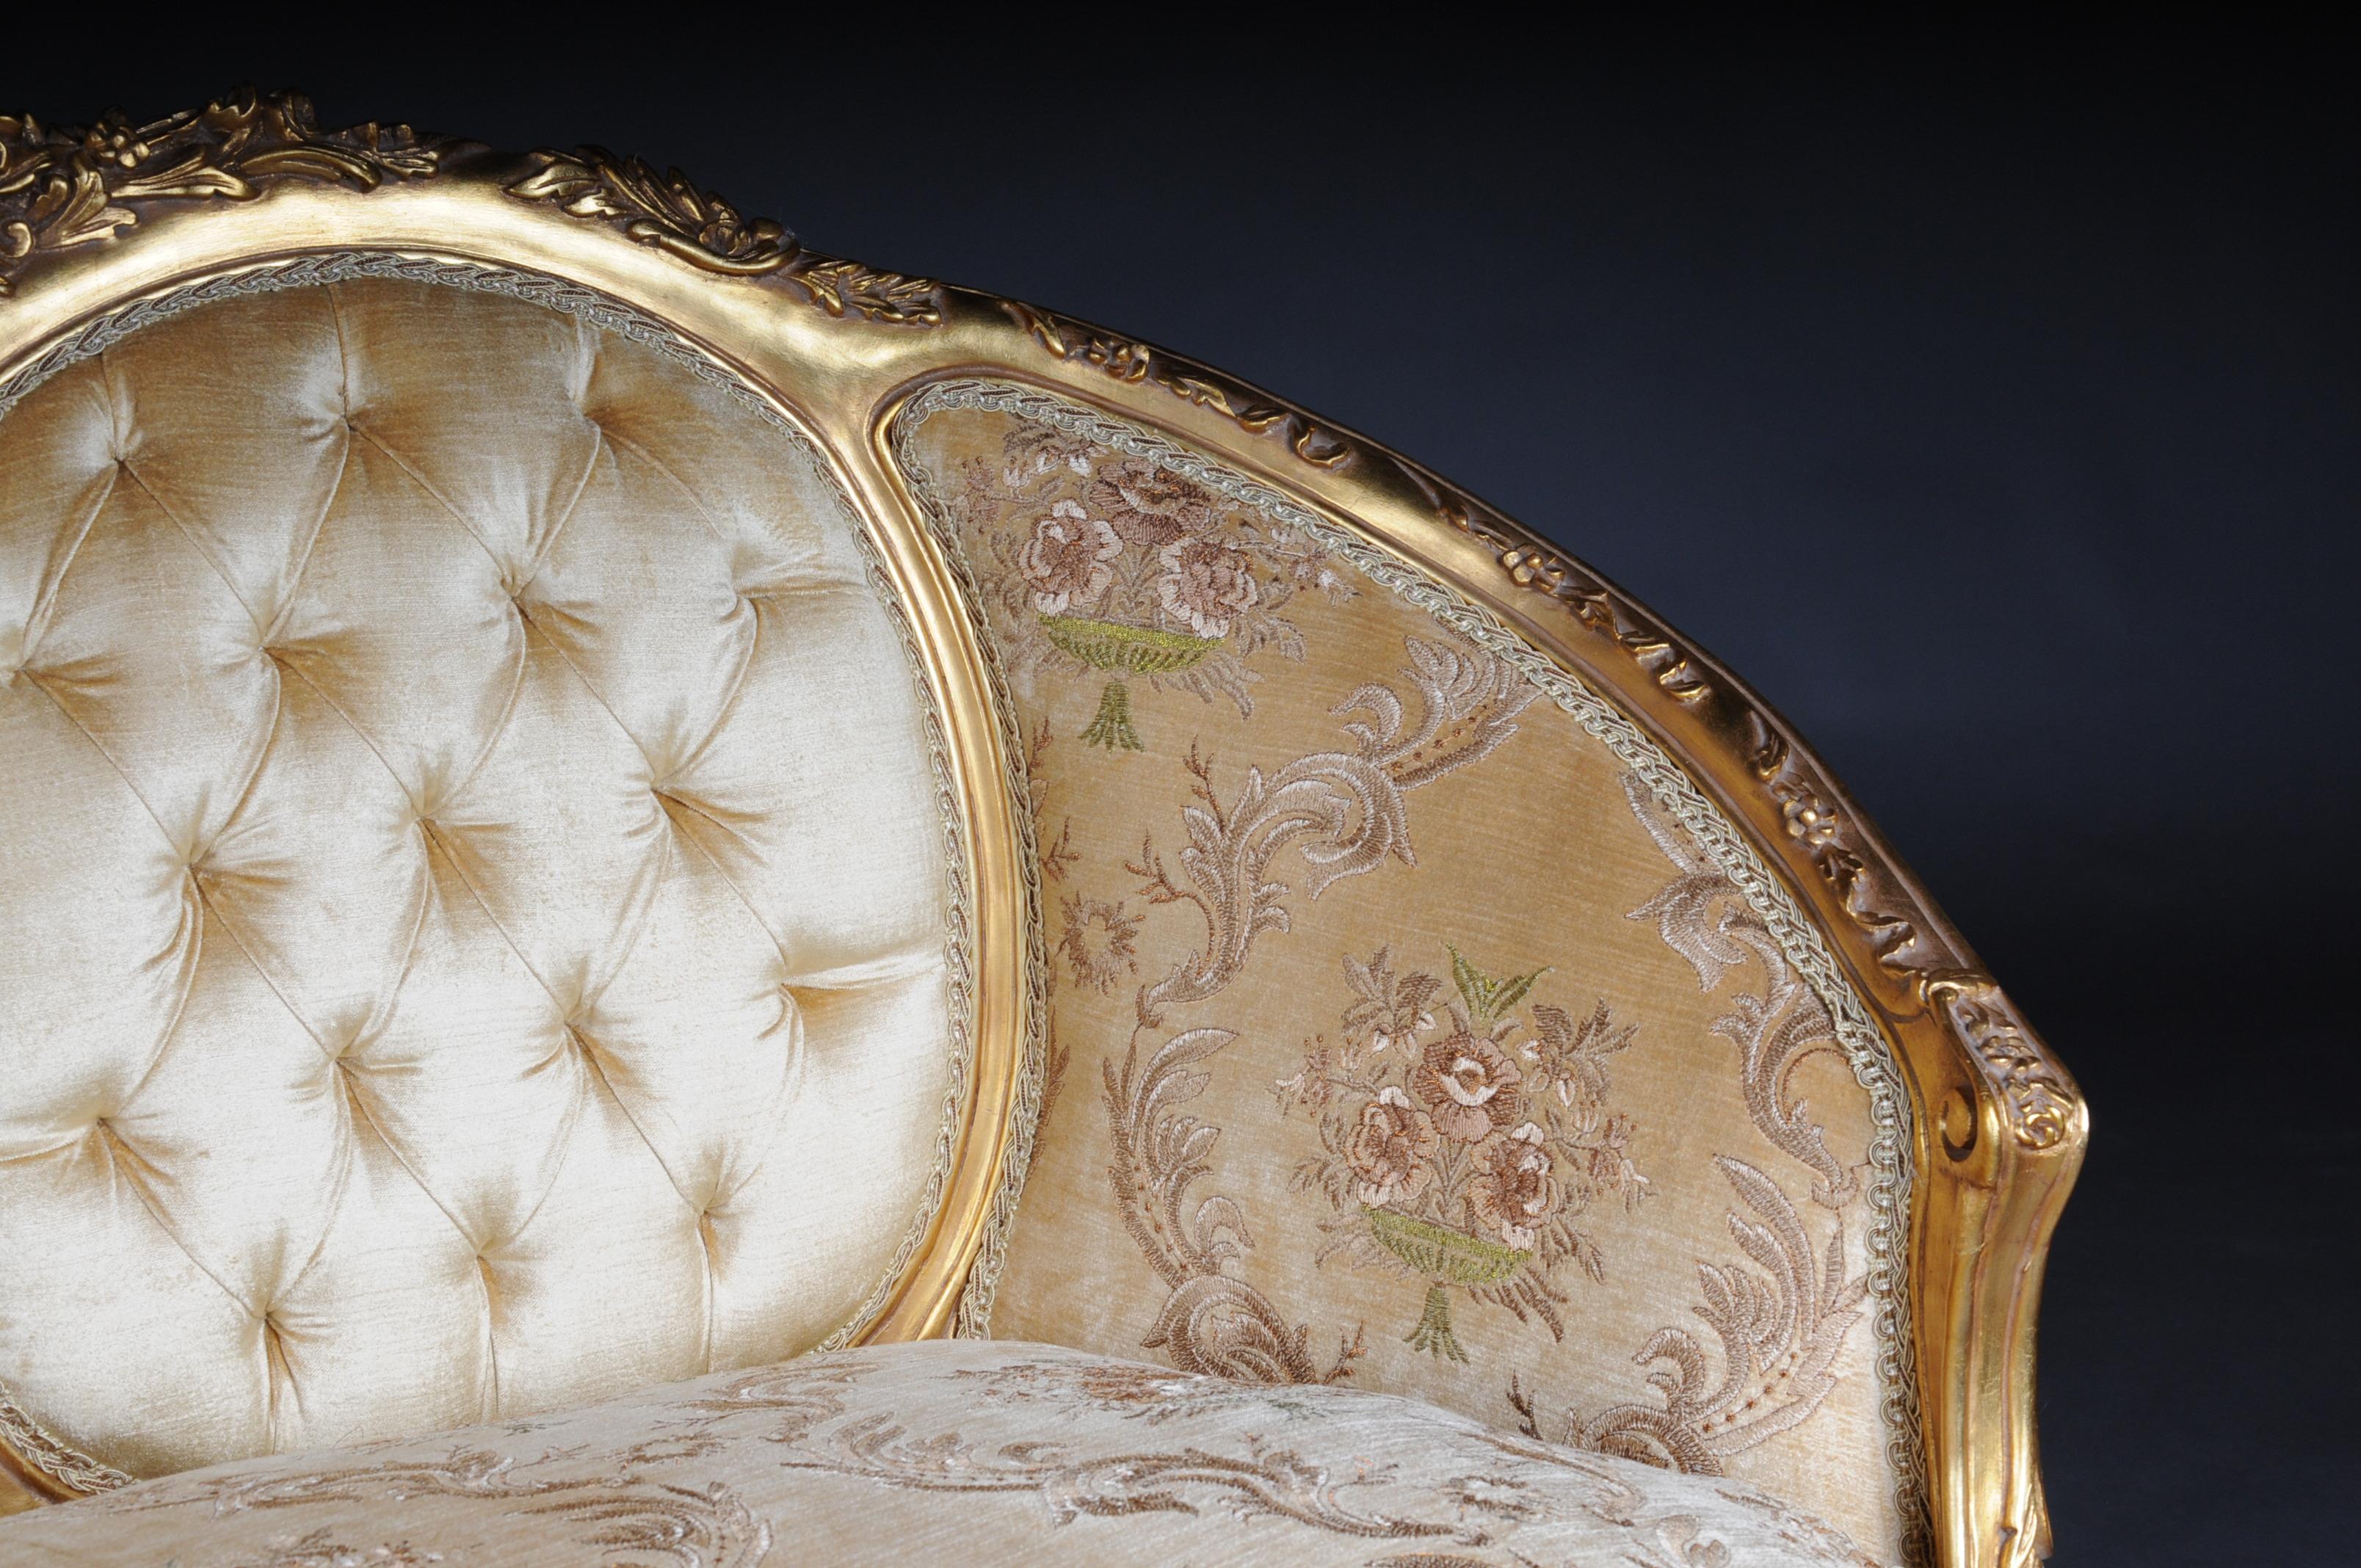 French Sofa, Canapé, Couch in Rococo or Louis XV Style 1